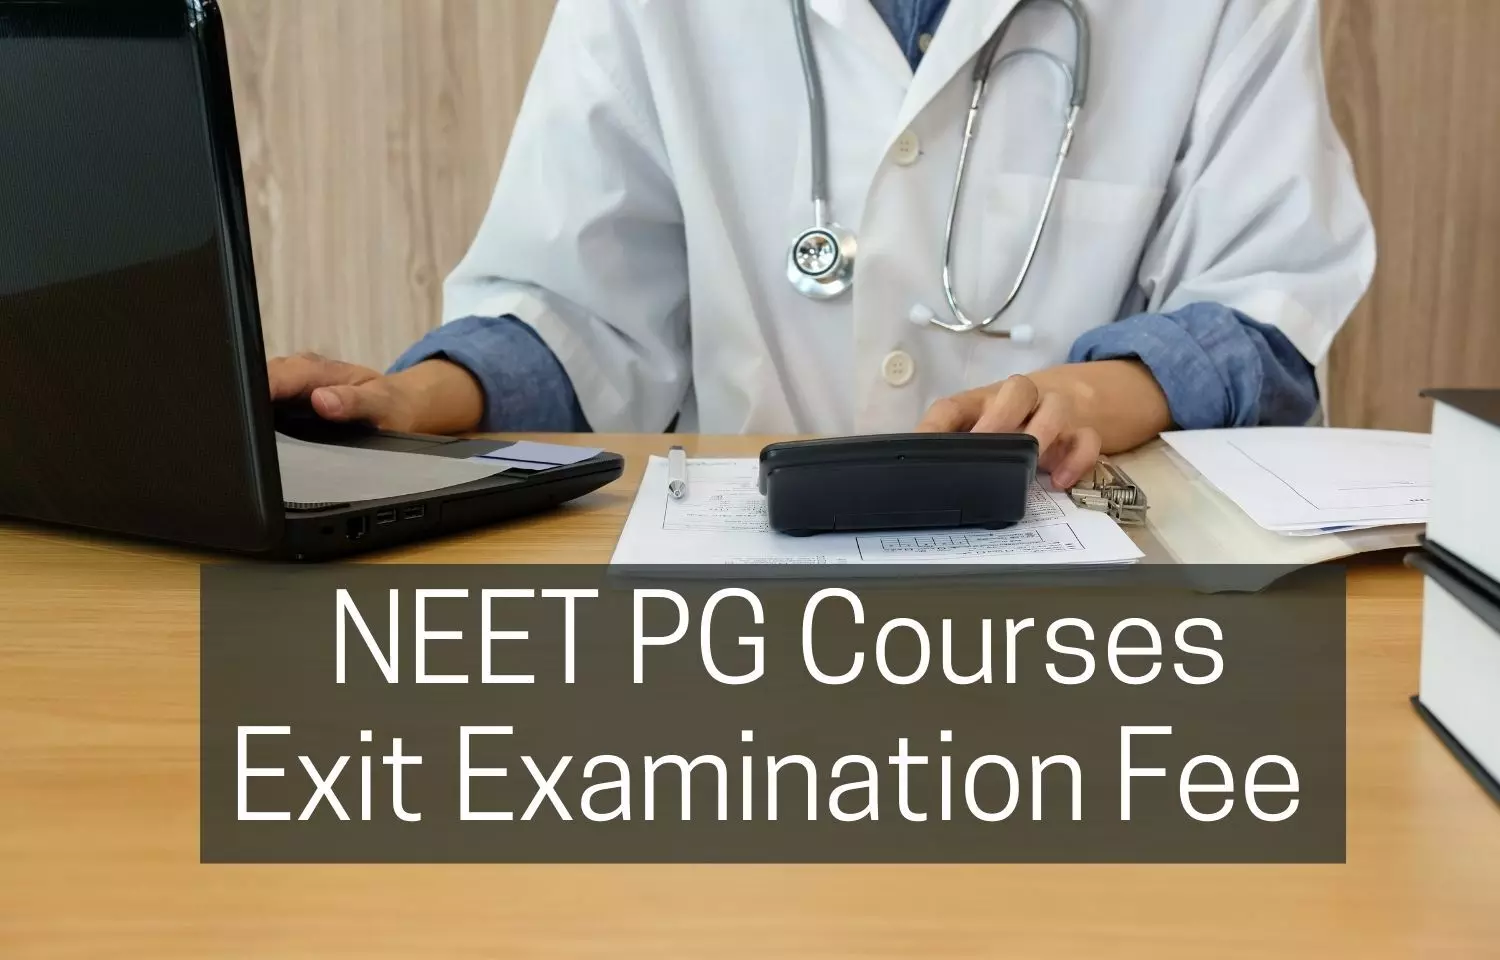 JIPMER notifies on Payment of Exit Exam Fee for MD, MS, MDS, DM, MCh, PDF, PDCC Courses June 2022 session, Details